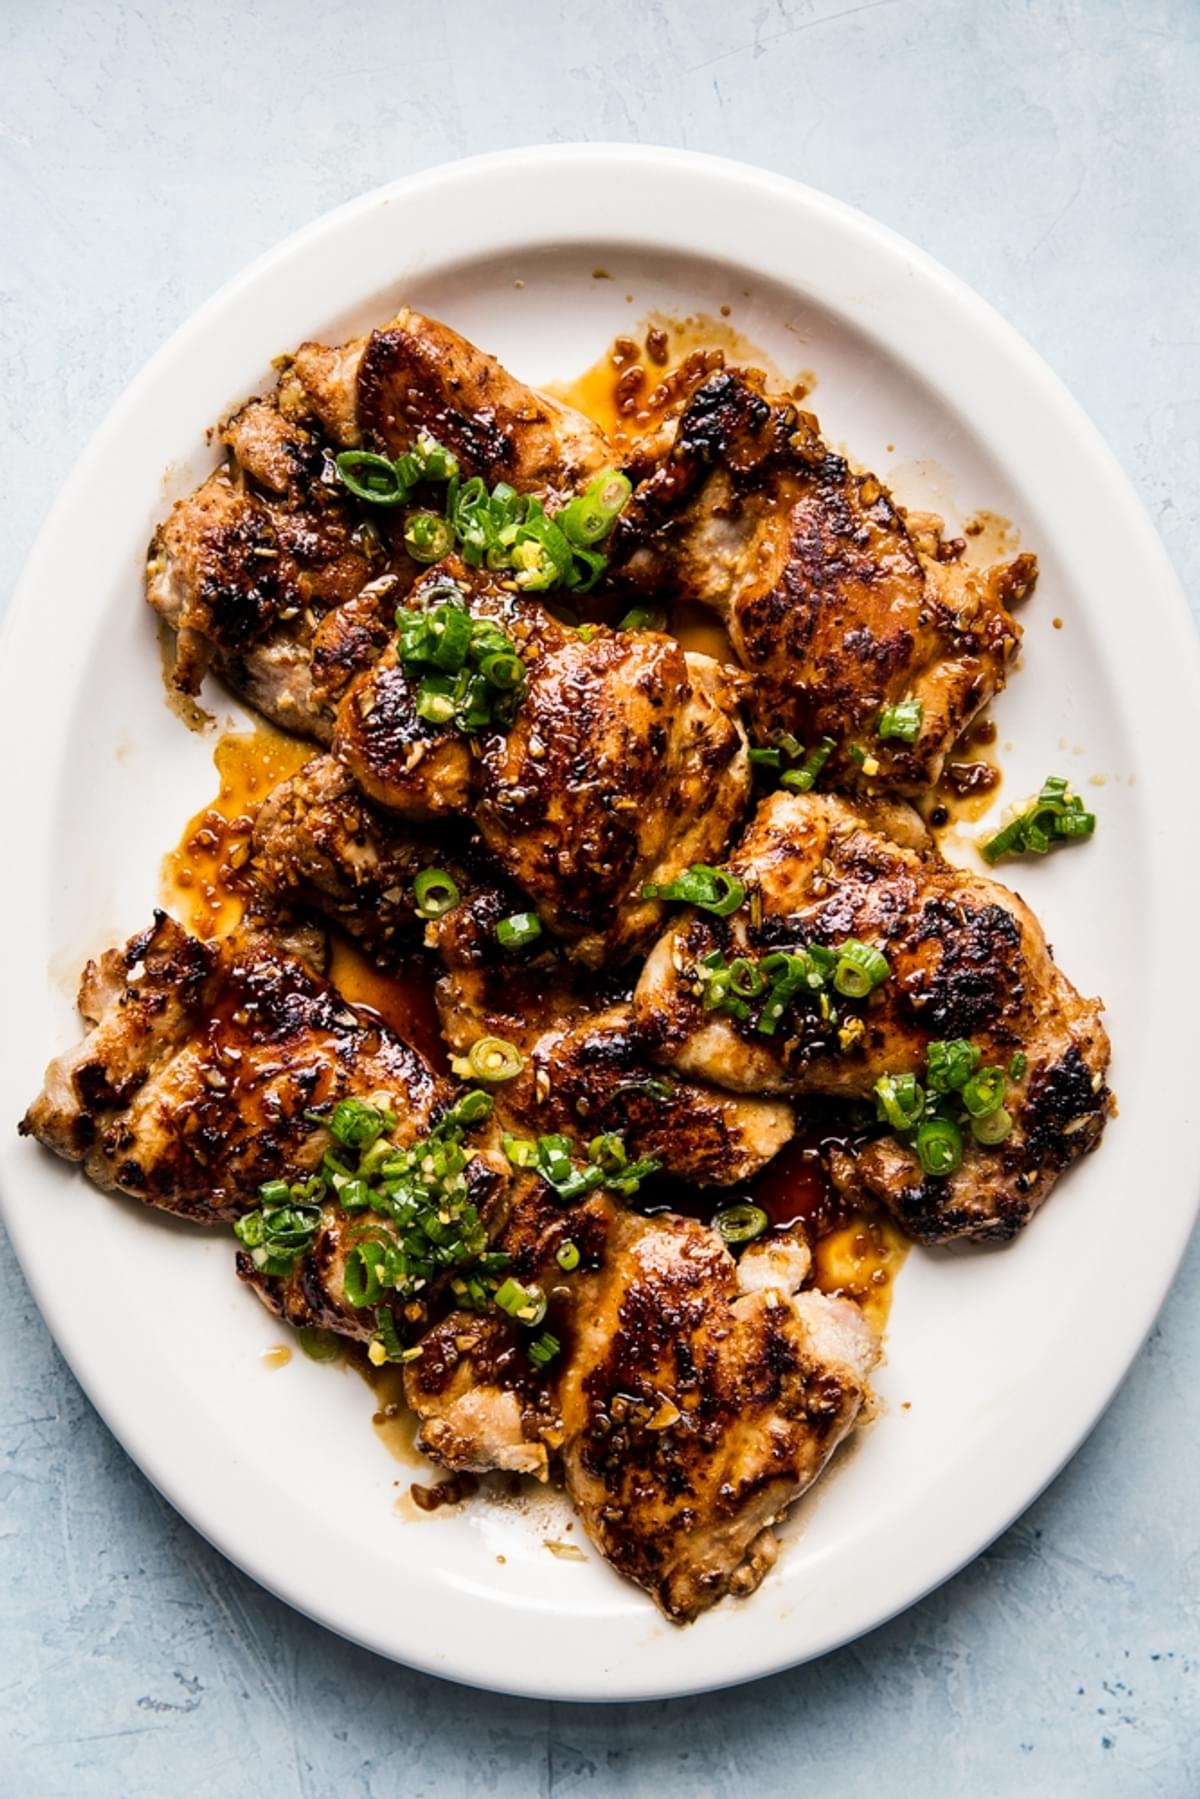 lemongrass chicken thighs with scallion oil and a sriracha-brown sugar sauce on a plate